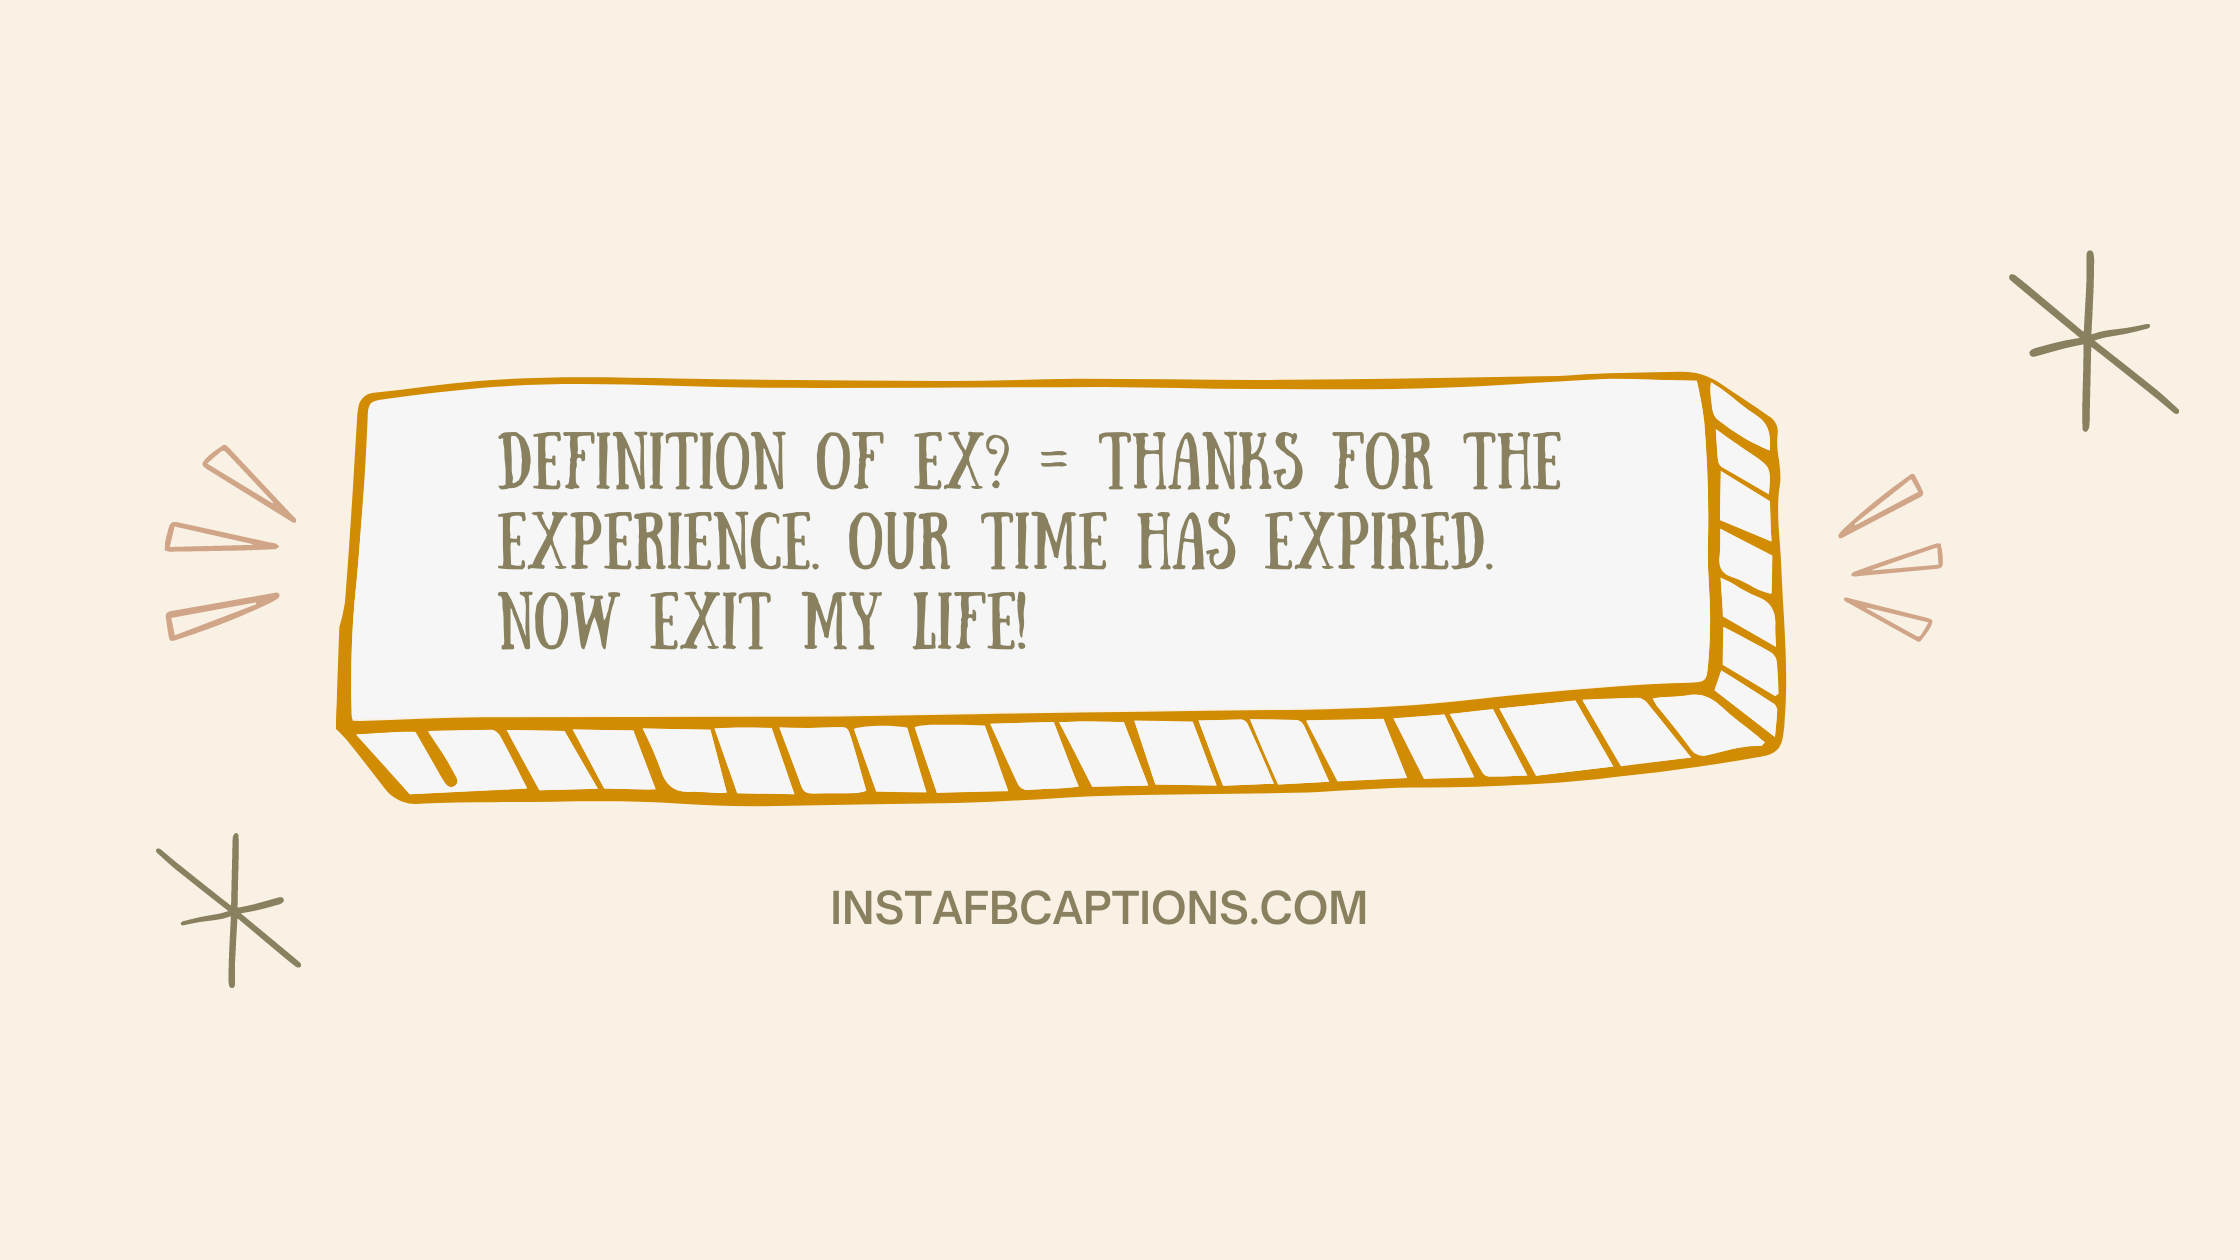 Definition of Ex? = Thanks for the Experience. Our time has Expired. Now EXit my life!  - Insulting and Savage Captions for Ex Girlfriend - [Full on Savage] Captions to Make Your Ex Jealous in 2023